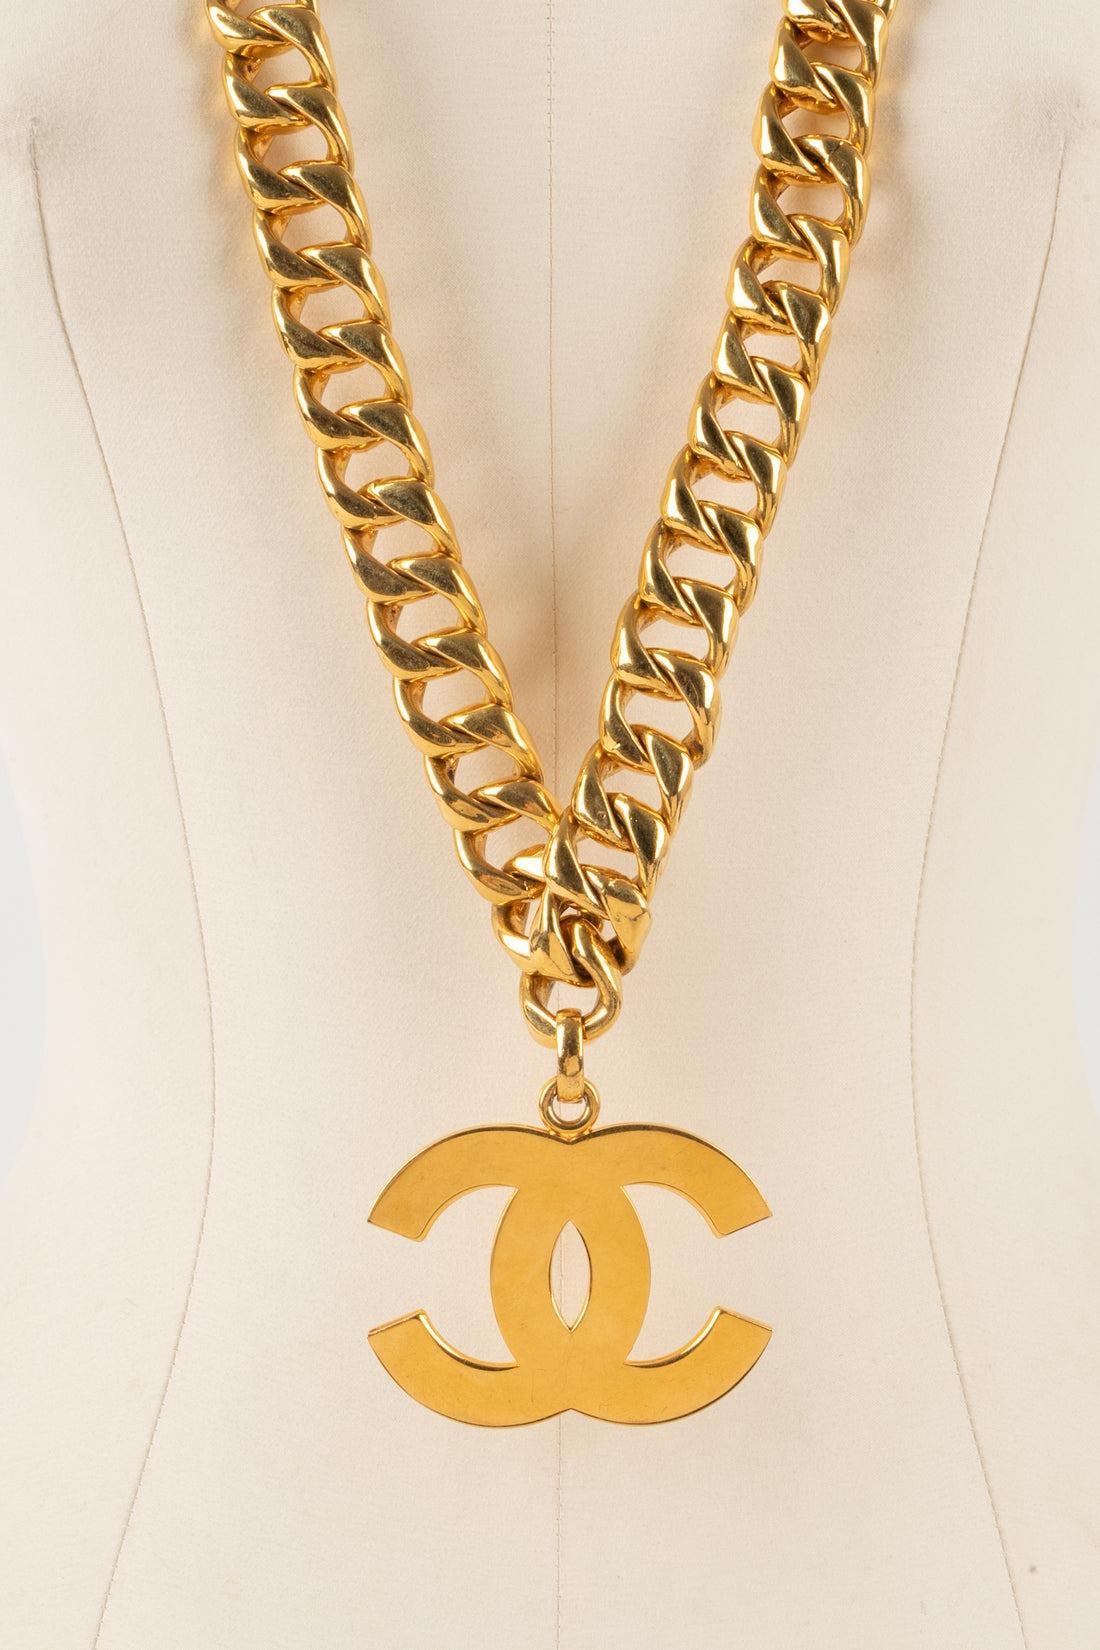 Chanel - (Made in France) Golden metal necklace holding a cc pendant. Spring-Summer 1993 Collection under the artistic direction of Karl Lagerfeld.

Additional information:
Condition: Very good condition
Dimensions: Length: 94 cm
Period: 20th